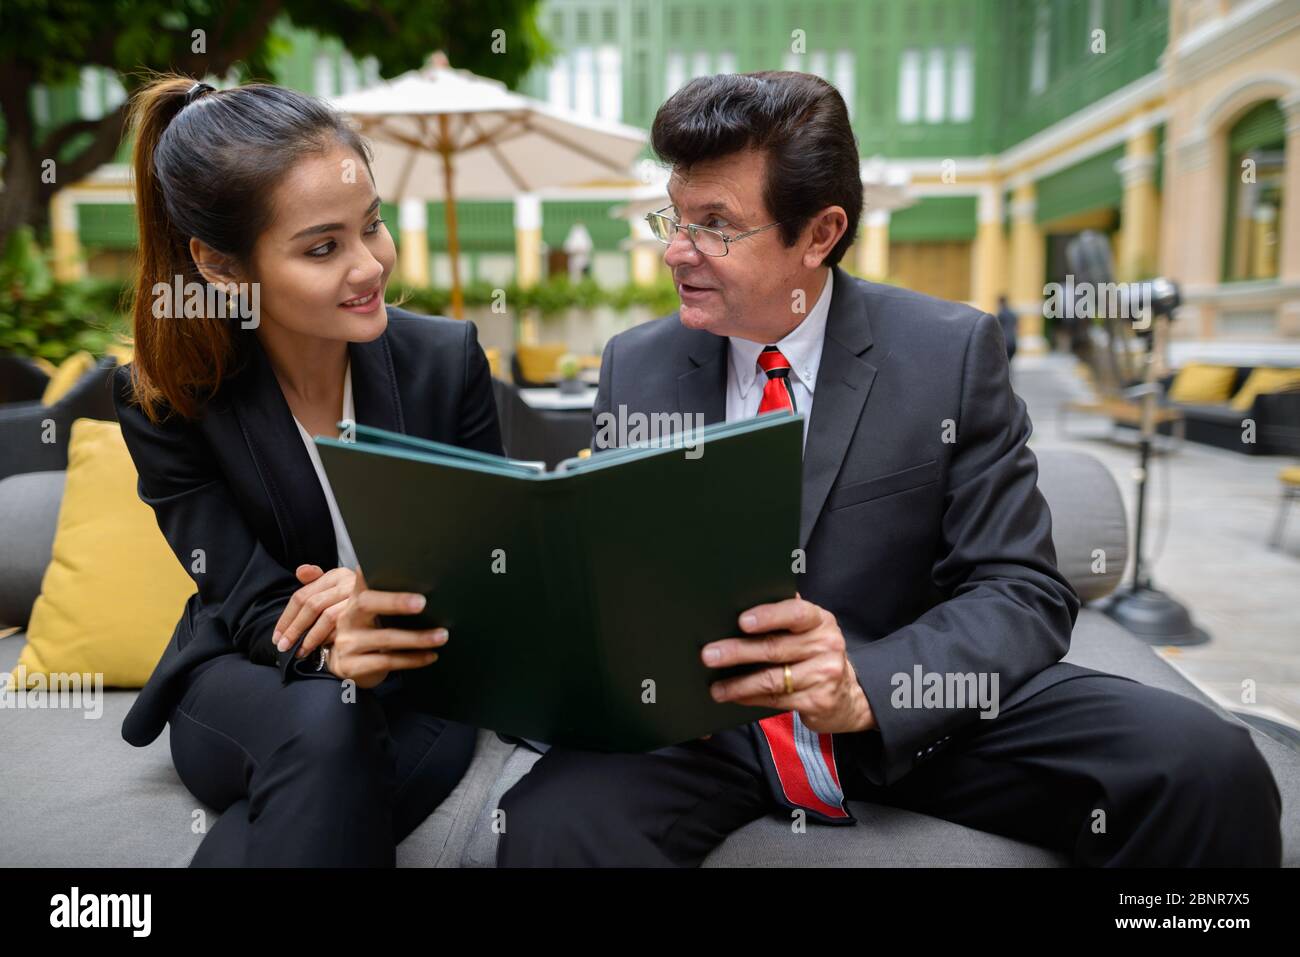 Happy mature businessman and young Asian businesswoman reading the menu together Stock Photo